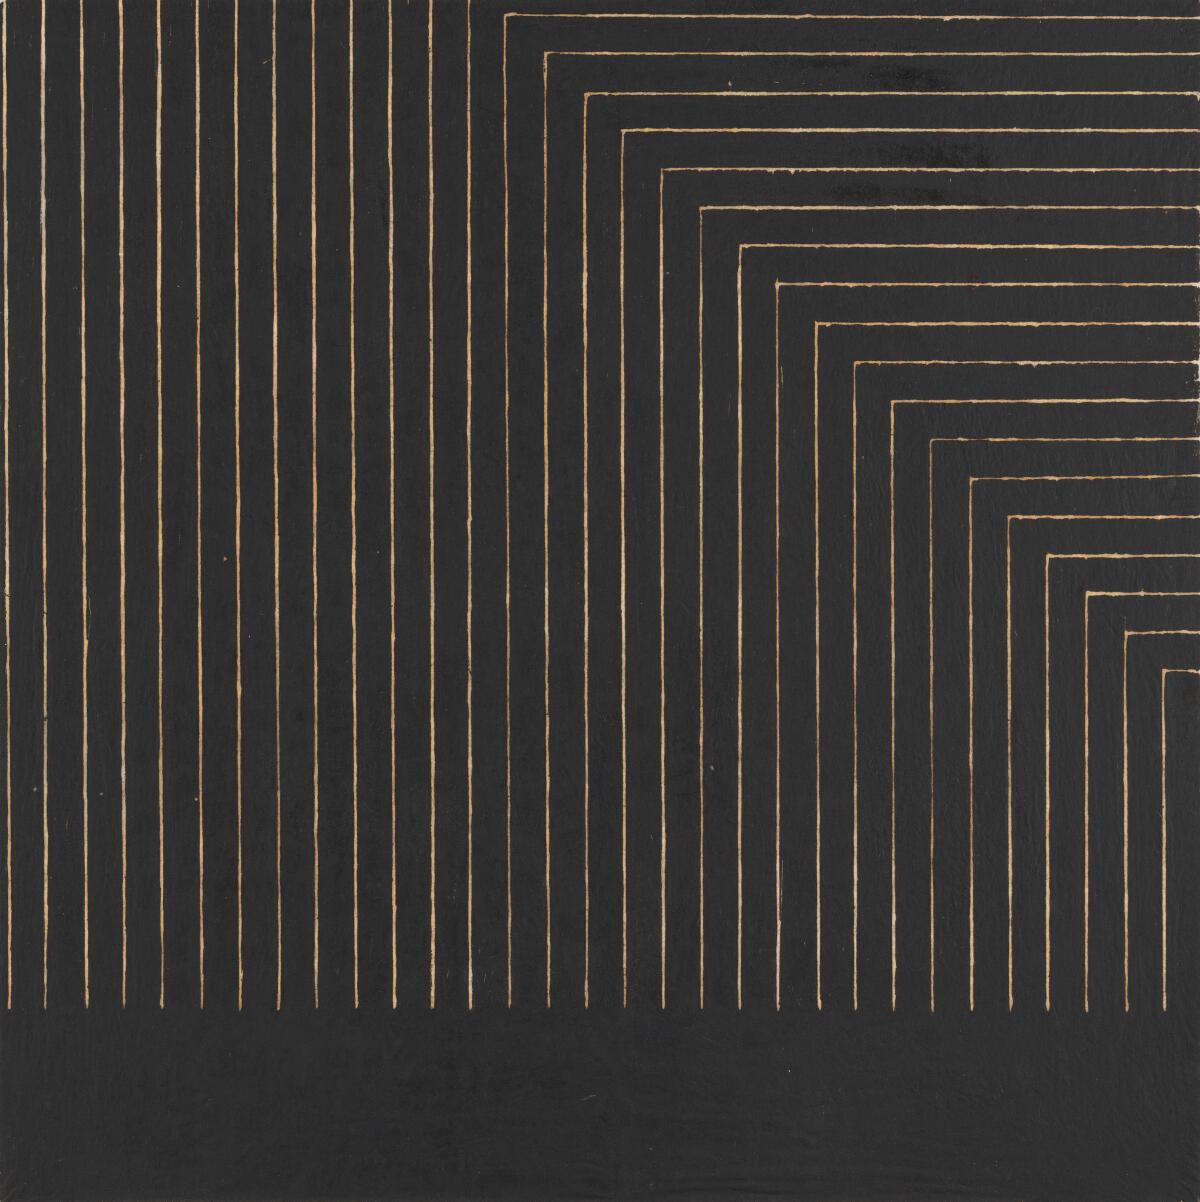 A geometric block print in black ink shows an echoing sequence of lines in the shape of a right angle.